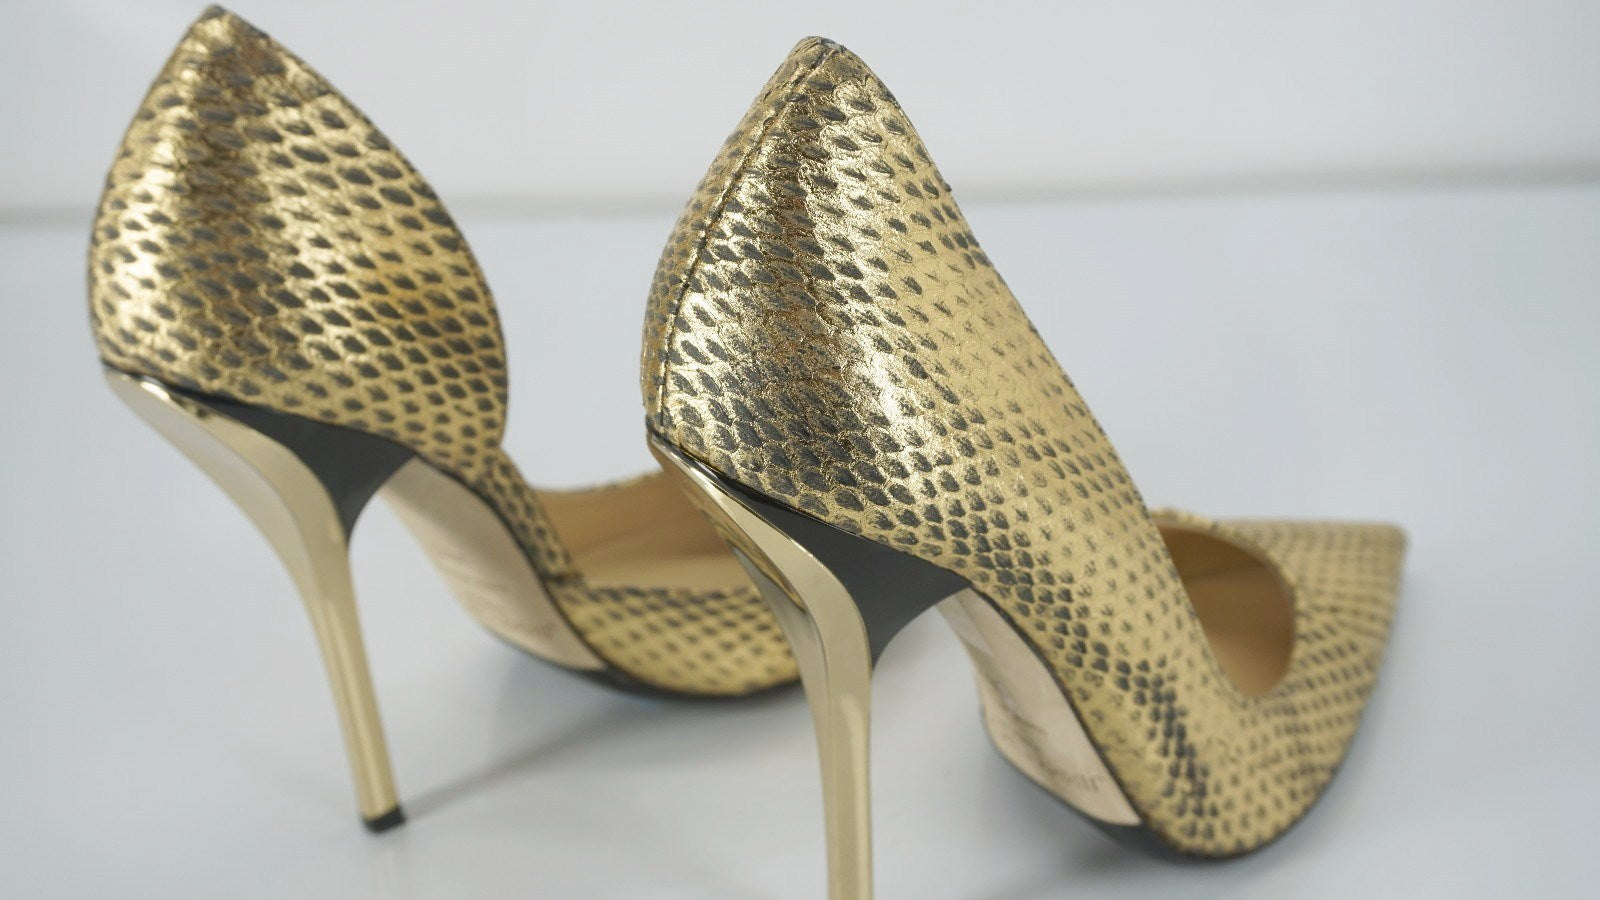 Jimmy Choo WIllis Gold Snake Half d'Orsay Pointy Pumps Size 38.5 High Heels $975